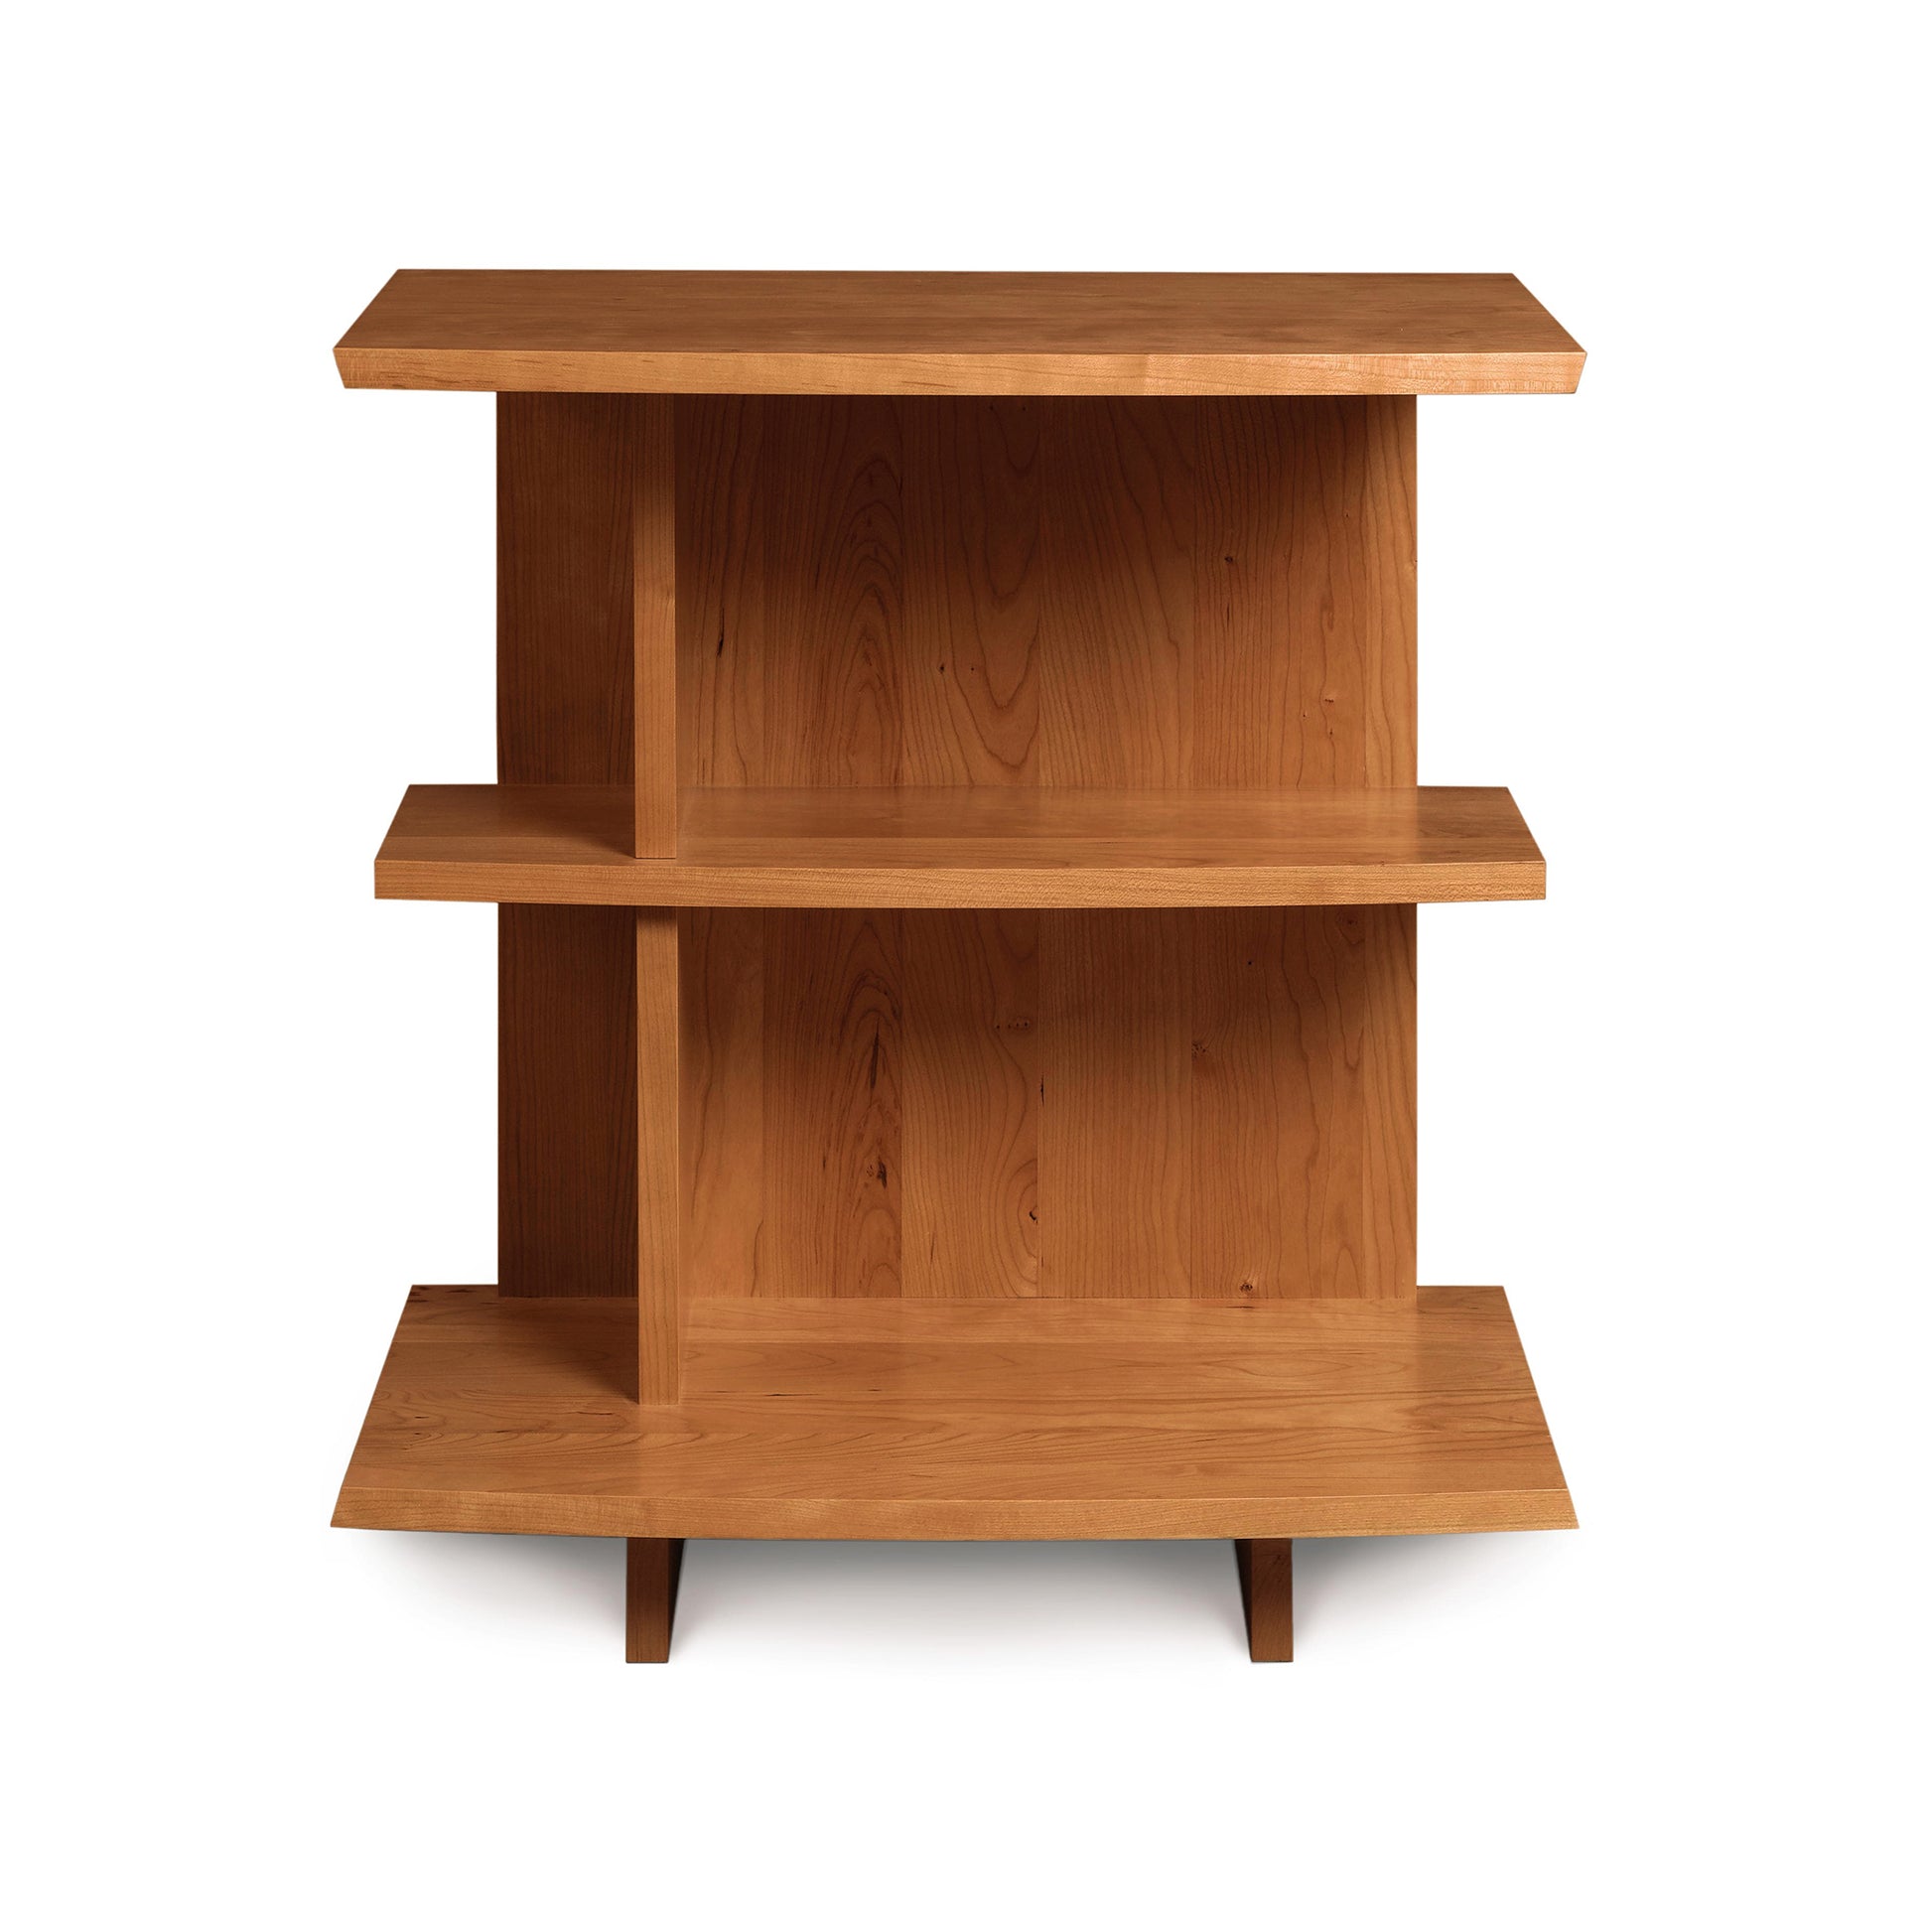 A Copeland Furniture Berkeley Open Shelf Nightstand - Left with two shelves on it.